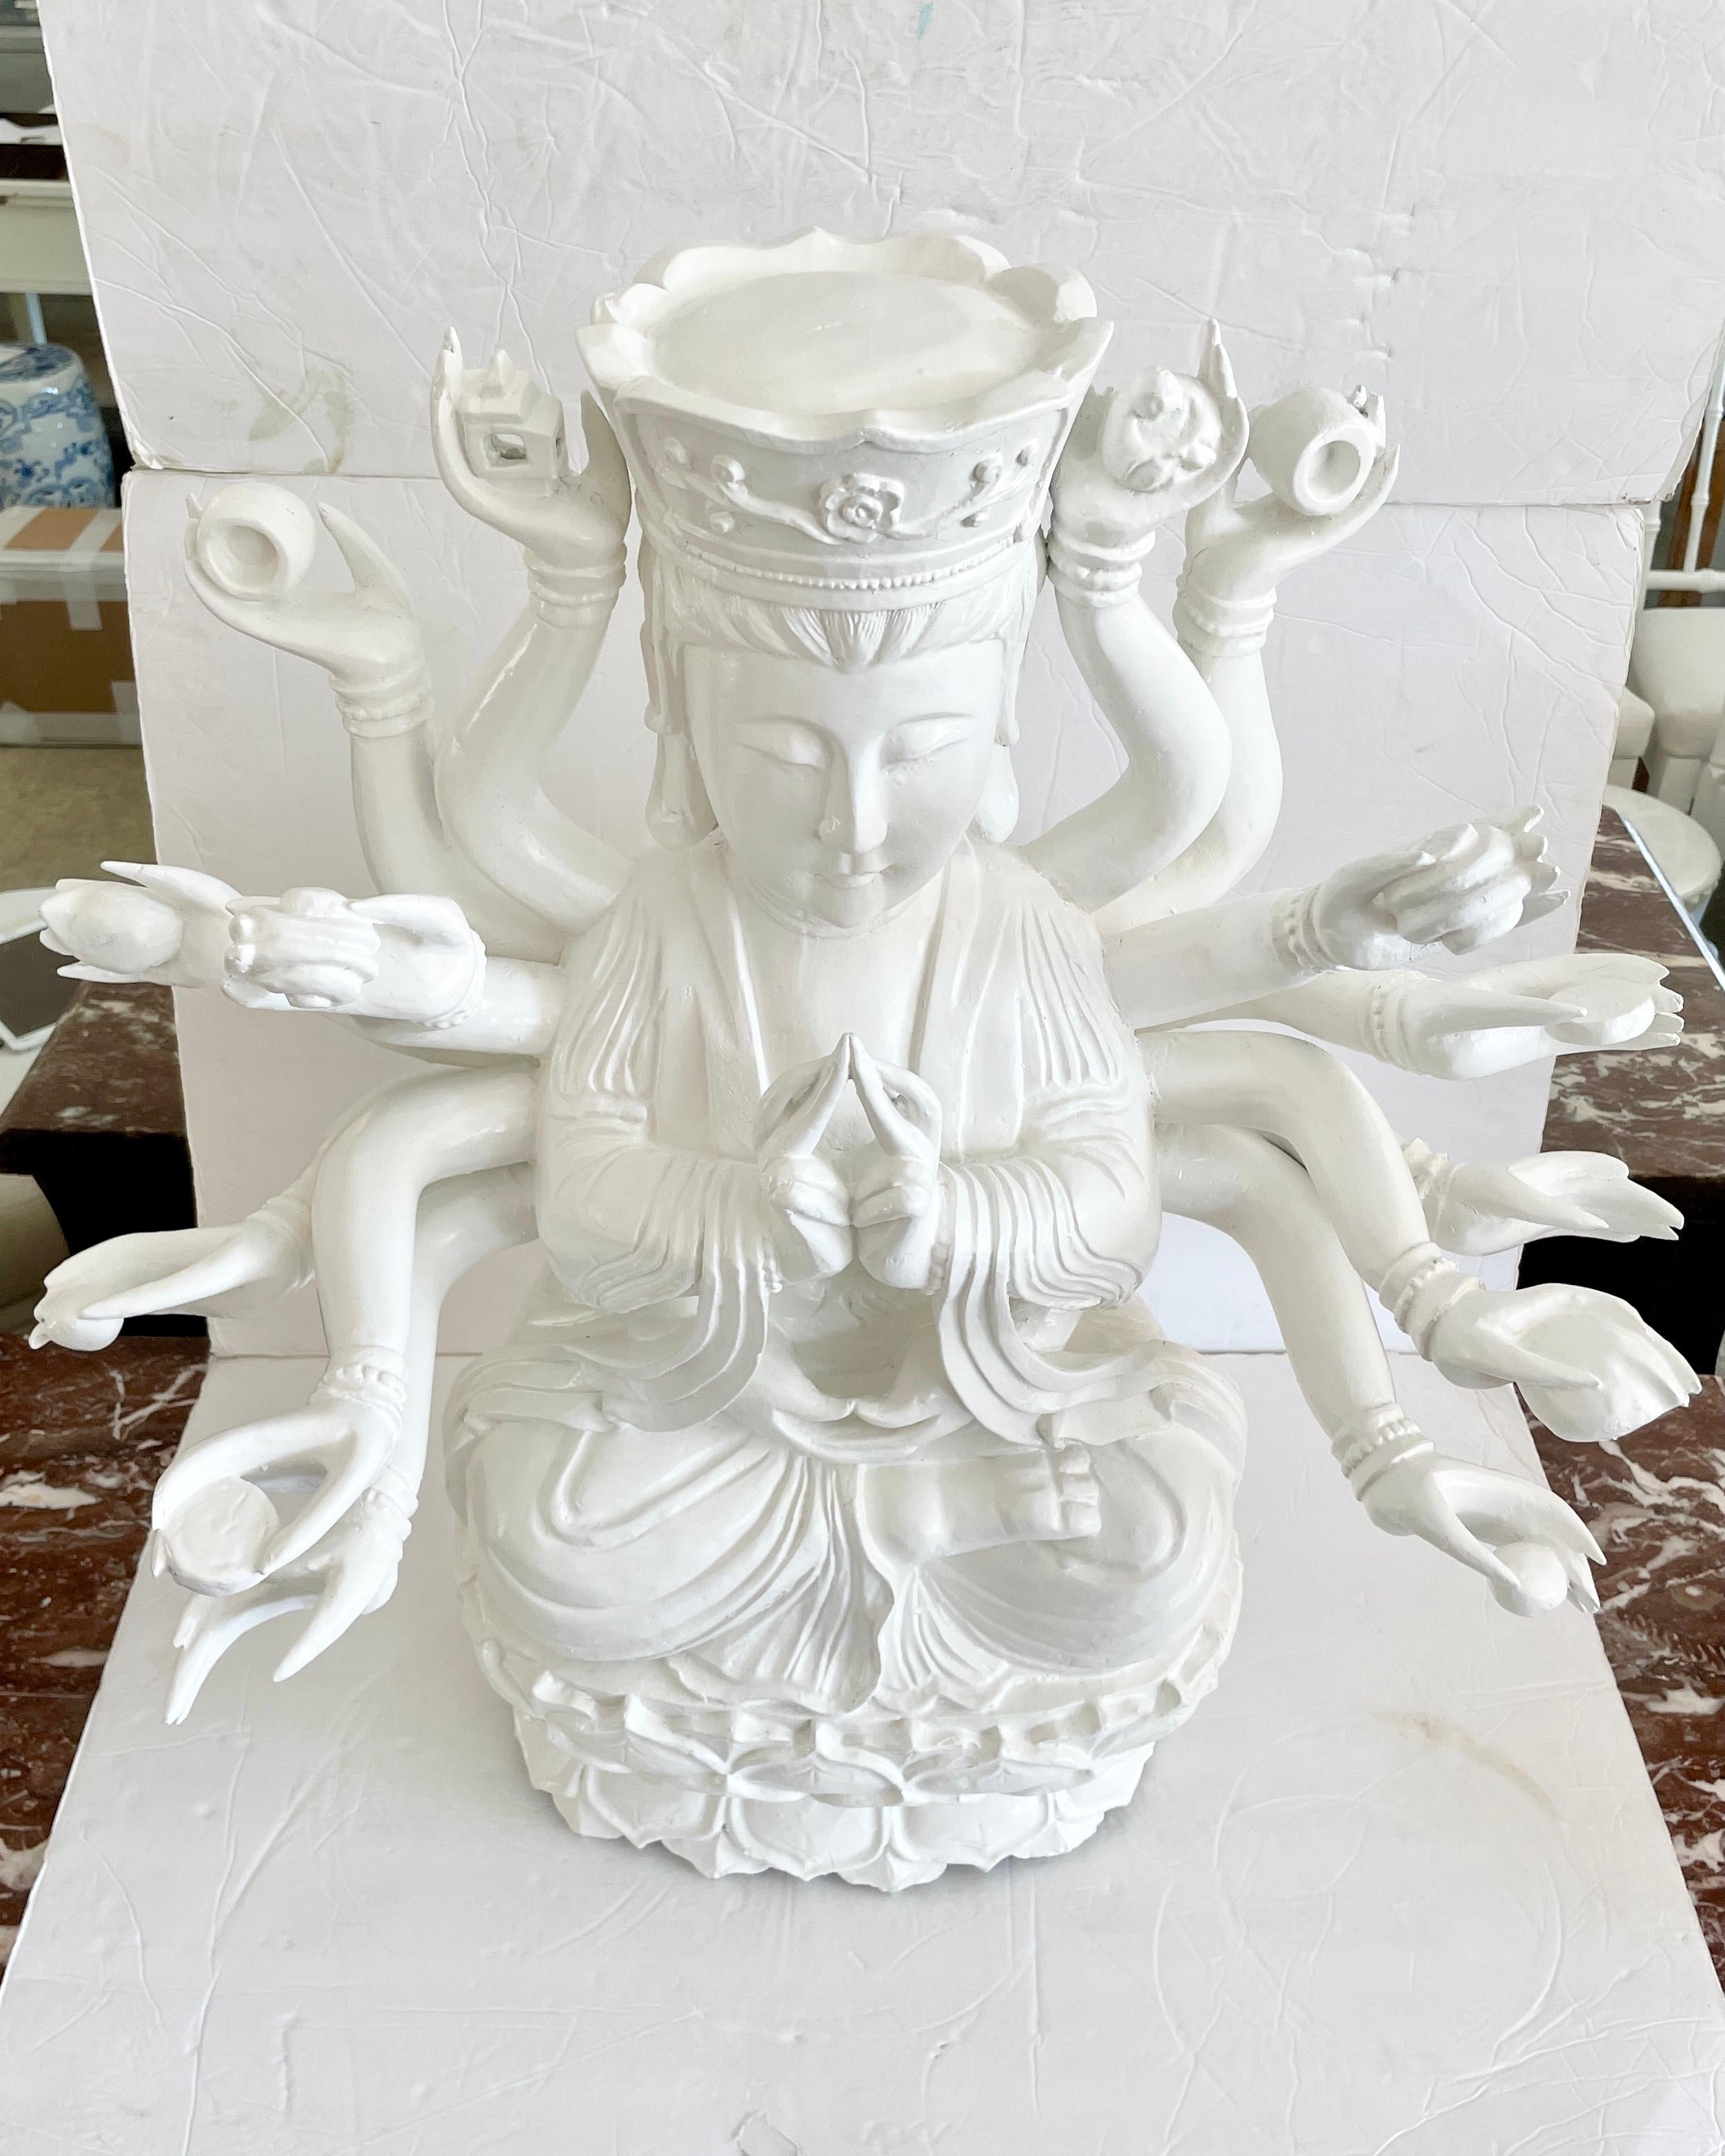 Gorgeous wood statue of the Tibetan Buddha deity Avalokitesvara freshly laquered in white. Great addition to your Asian decor and table tops.